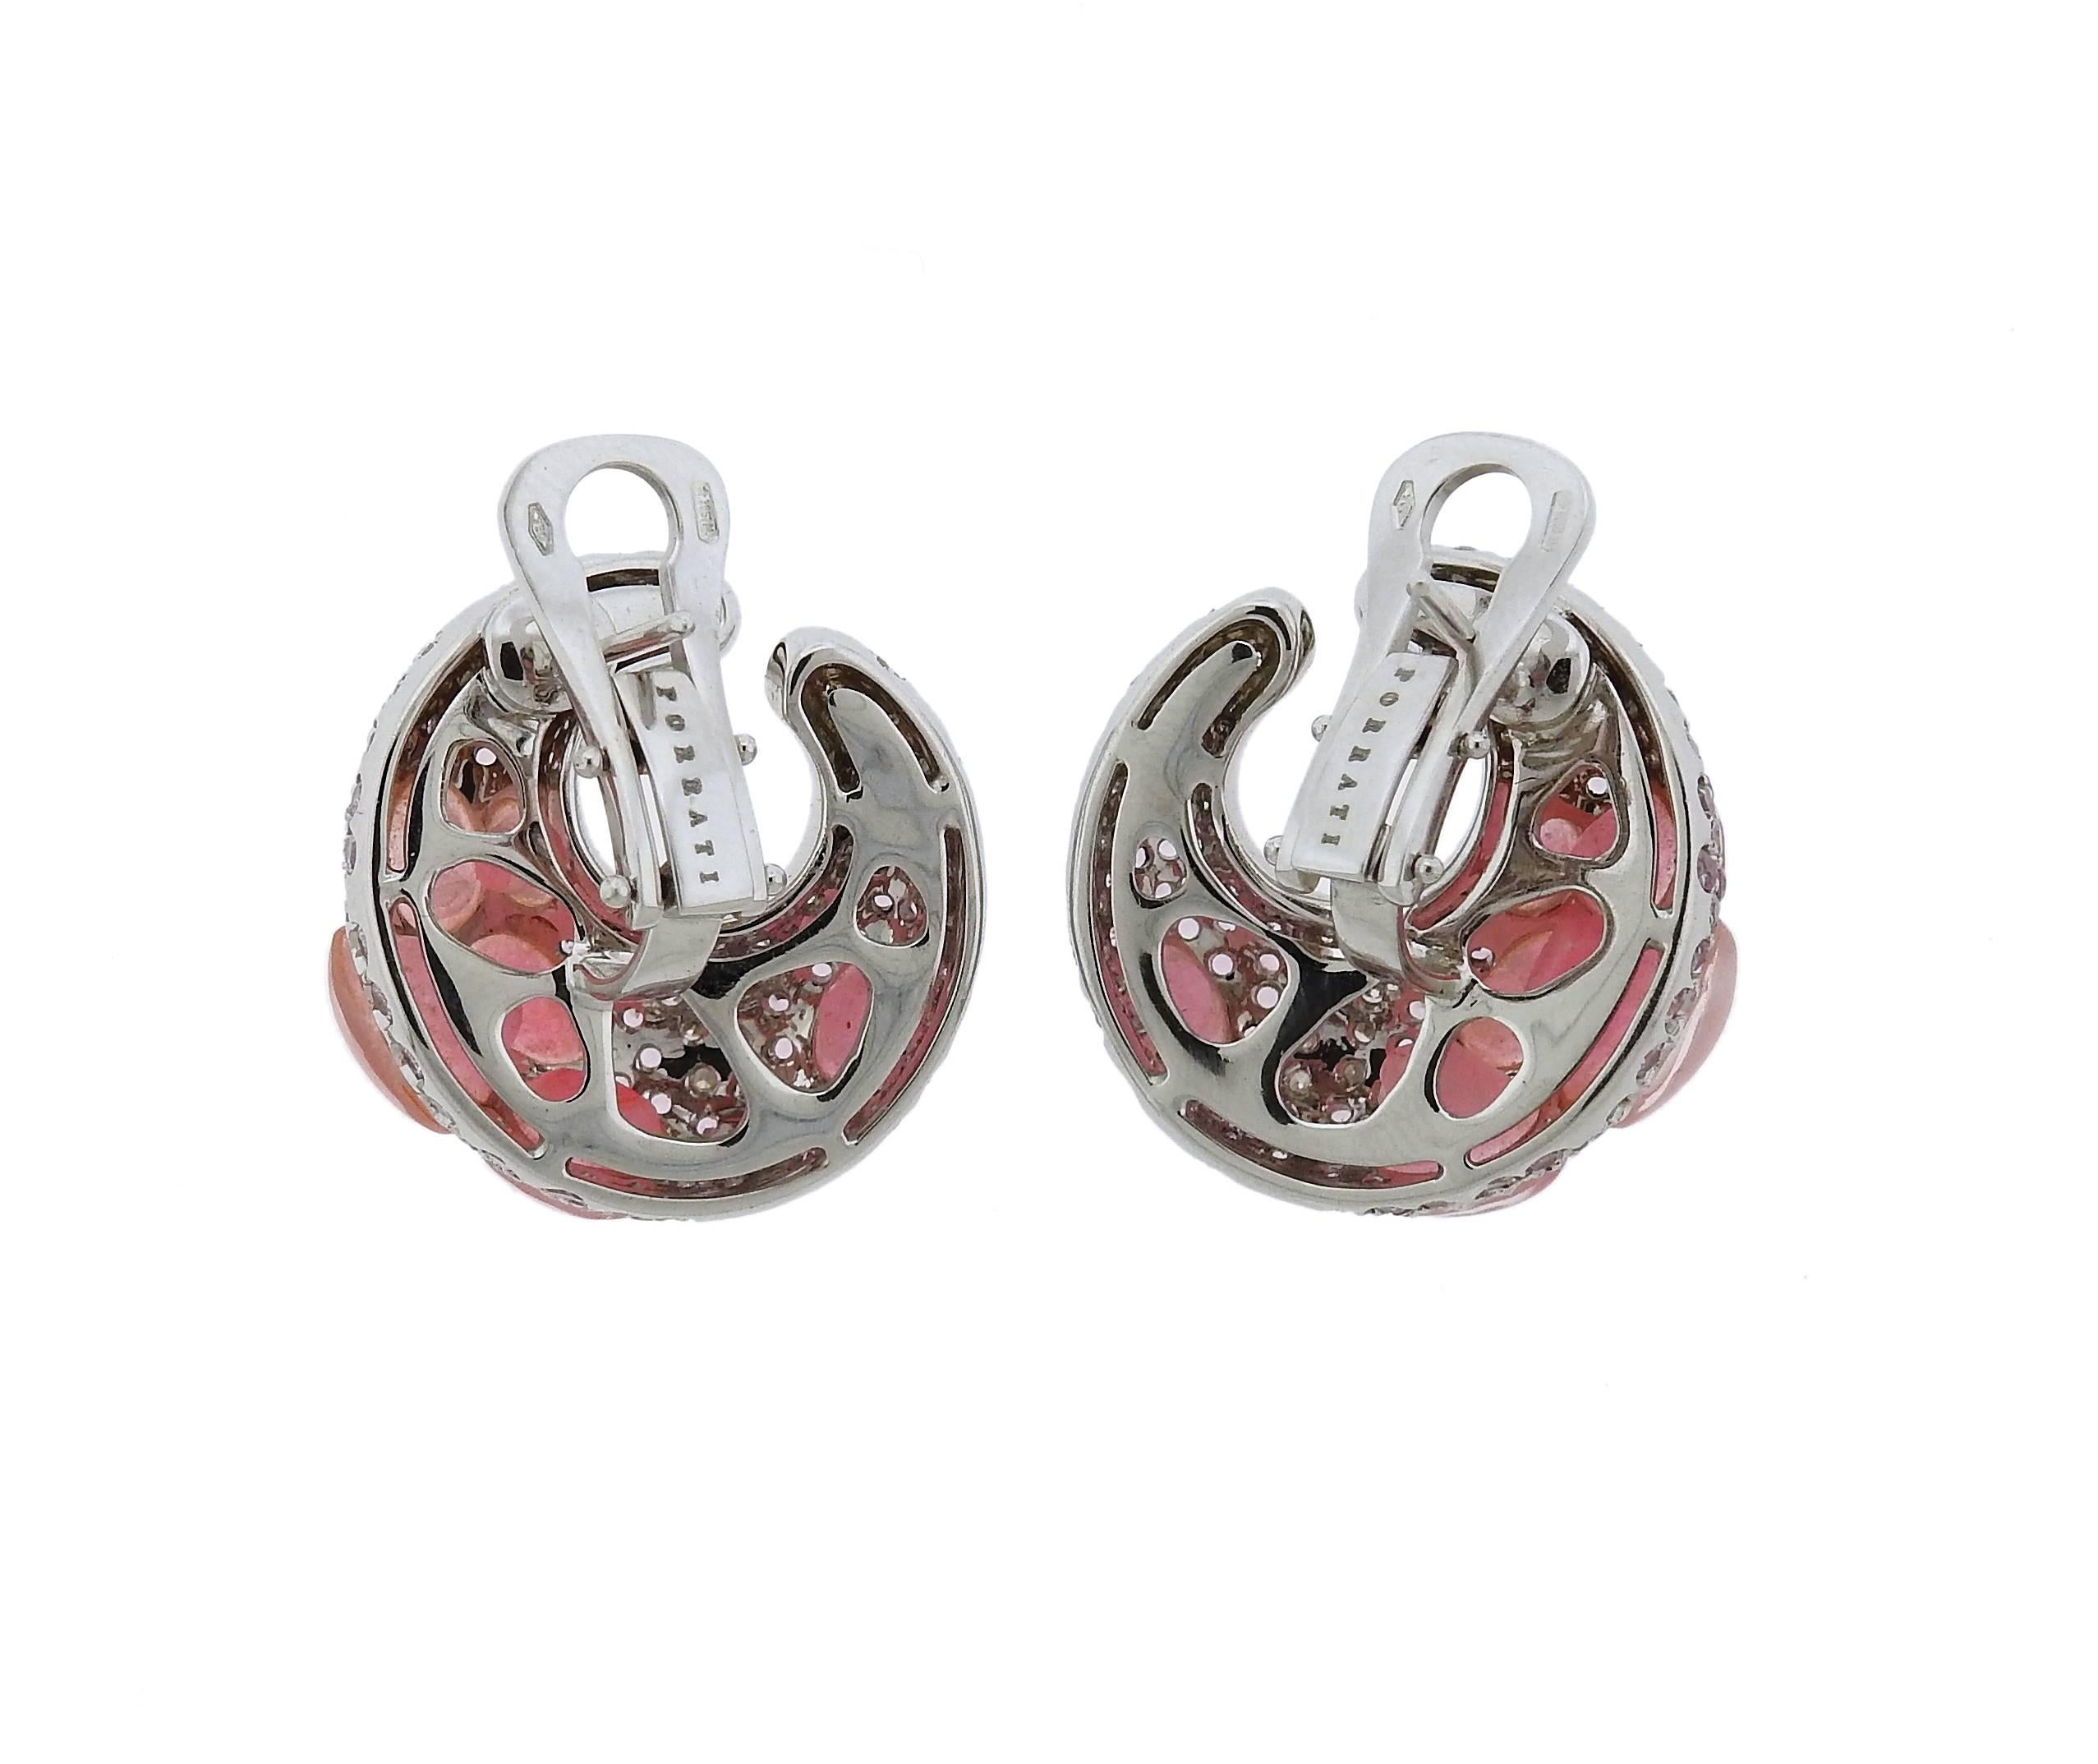 A pair of 18k white gold earrings set with pink sapphires and approximately 1 carat of G/VS diamonds.  The earrings measure 23mm x 23mm and weigh 22.1 grams.  Marked: Porrati, 750, Italian mark.